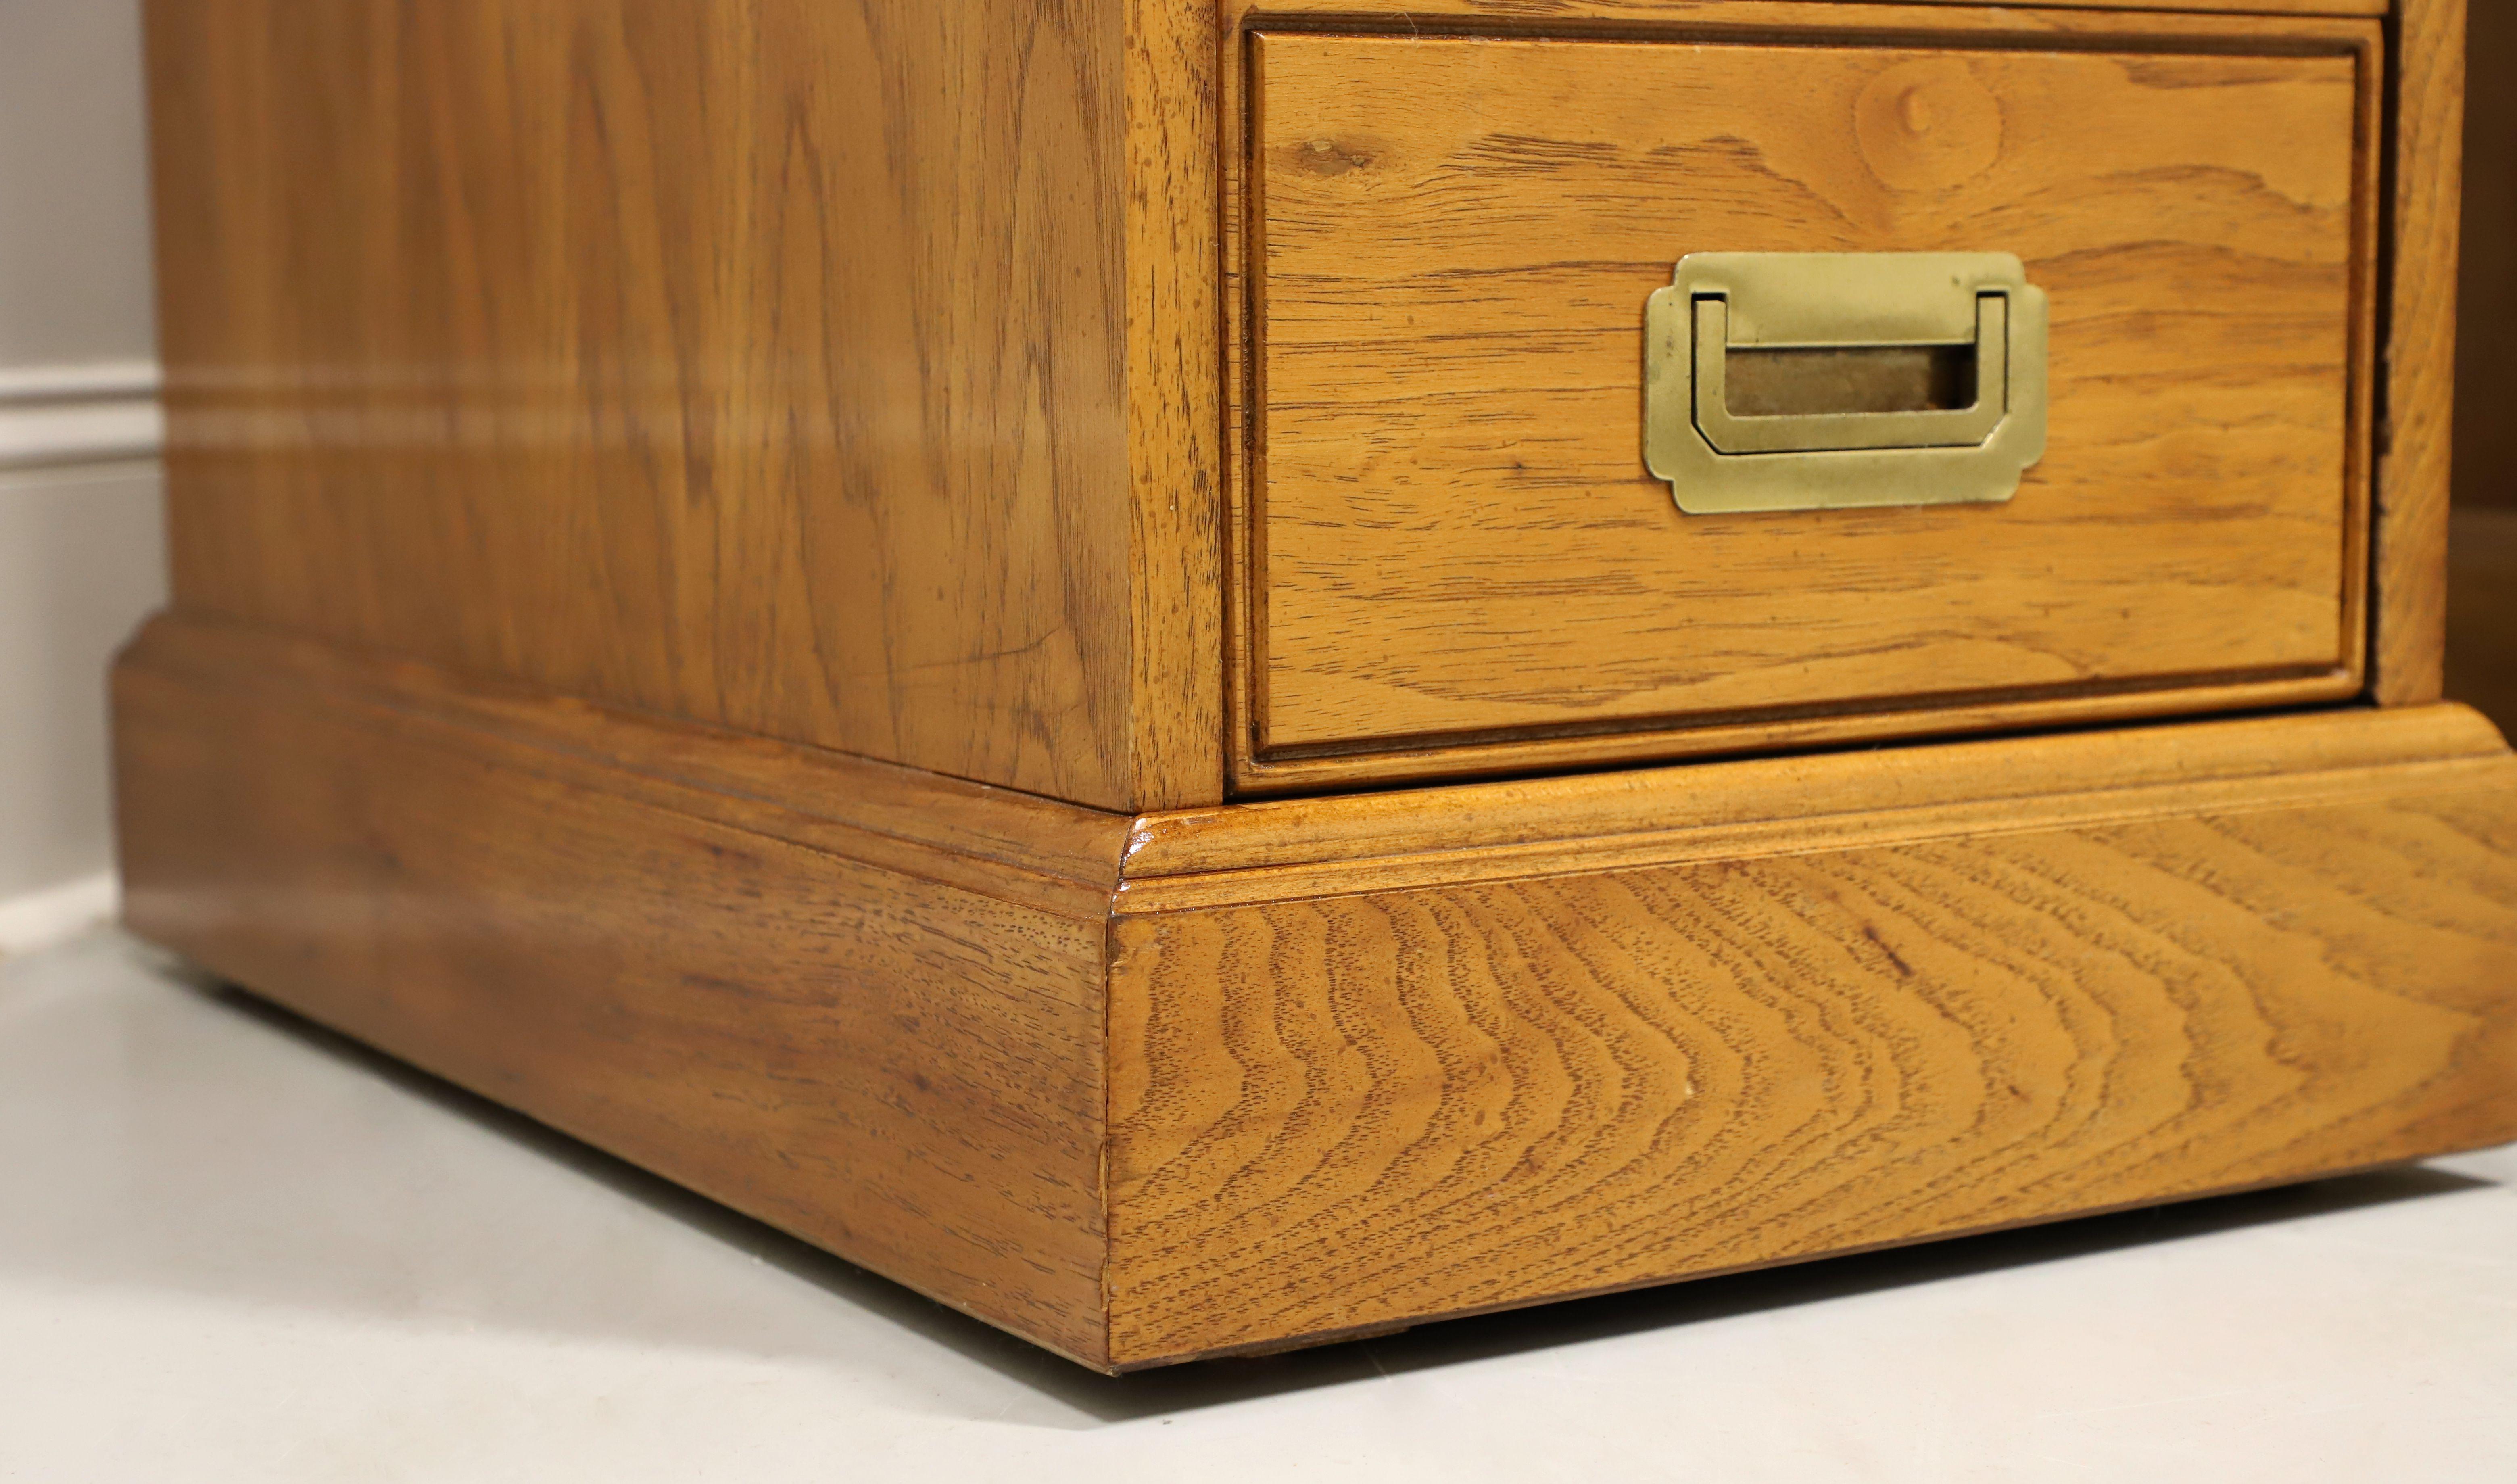 20th Century NATIONAL MT. AIRY Oak Campaign Style Kneehole Desk with Leather Writing Surface